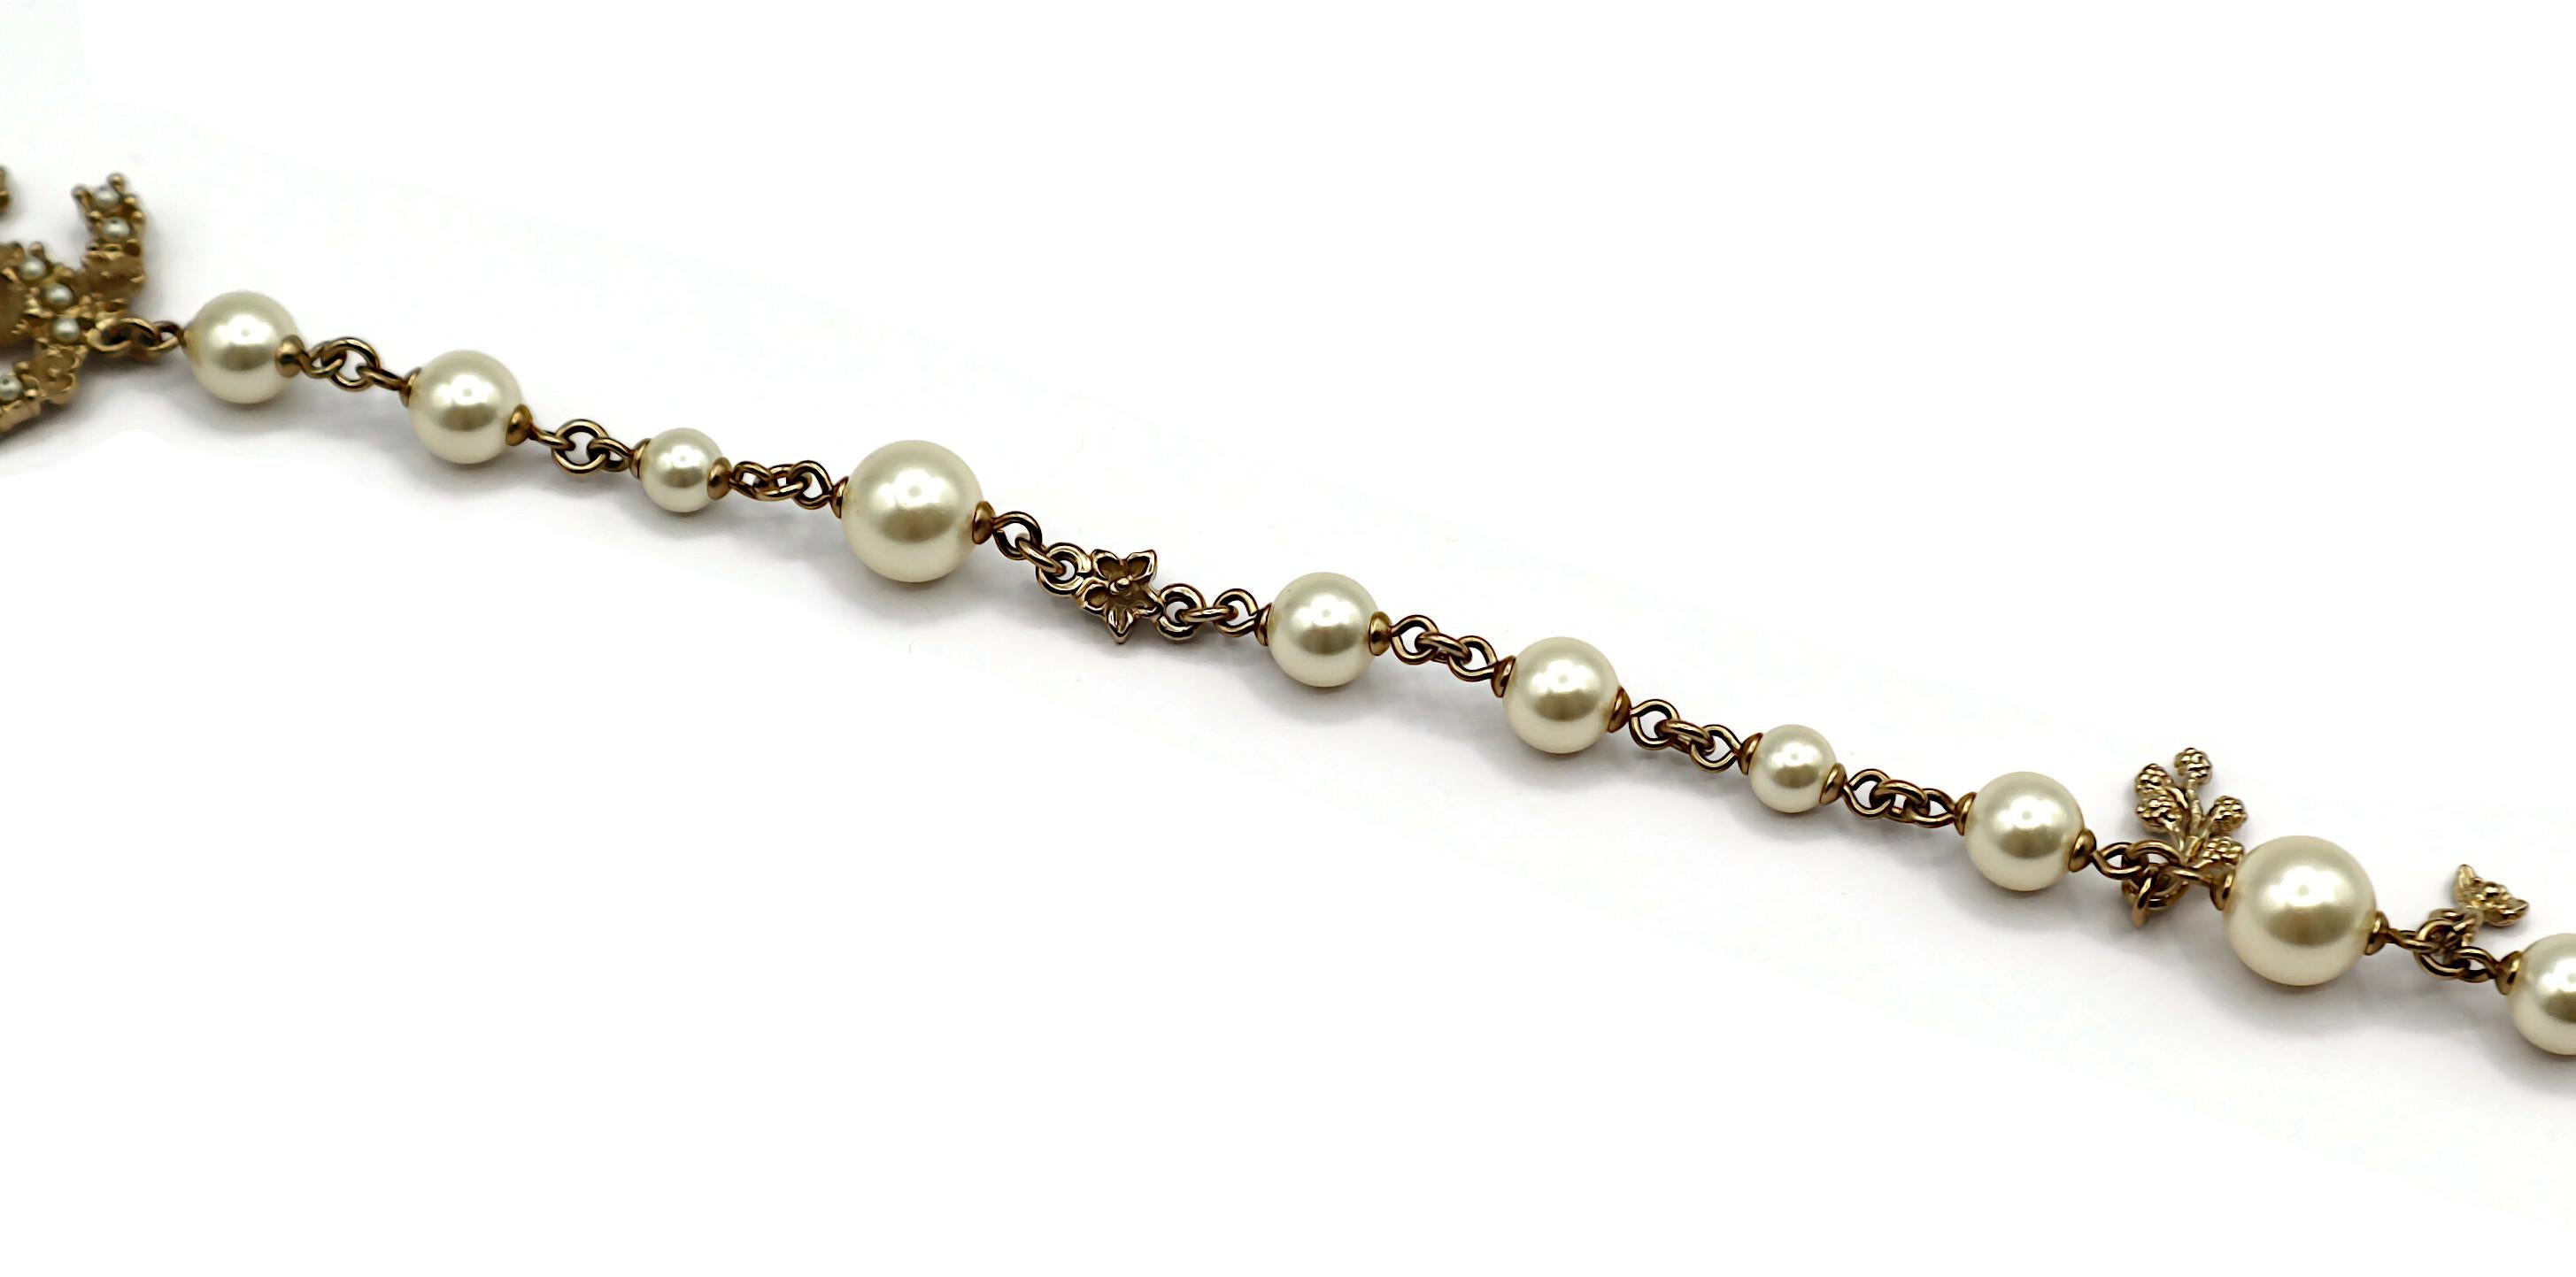 CHANEL by KARL LAGERFELD Faux Pearl CC Logo Necklace, 2012 For Sale 6